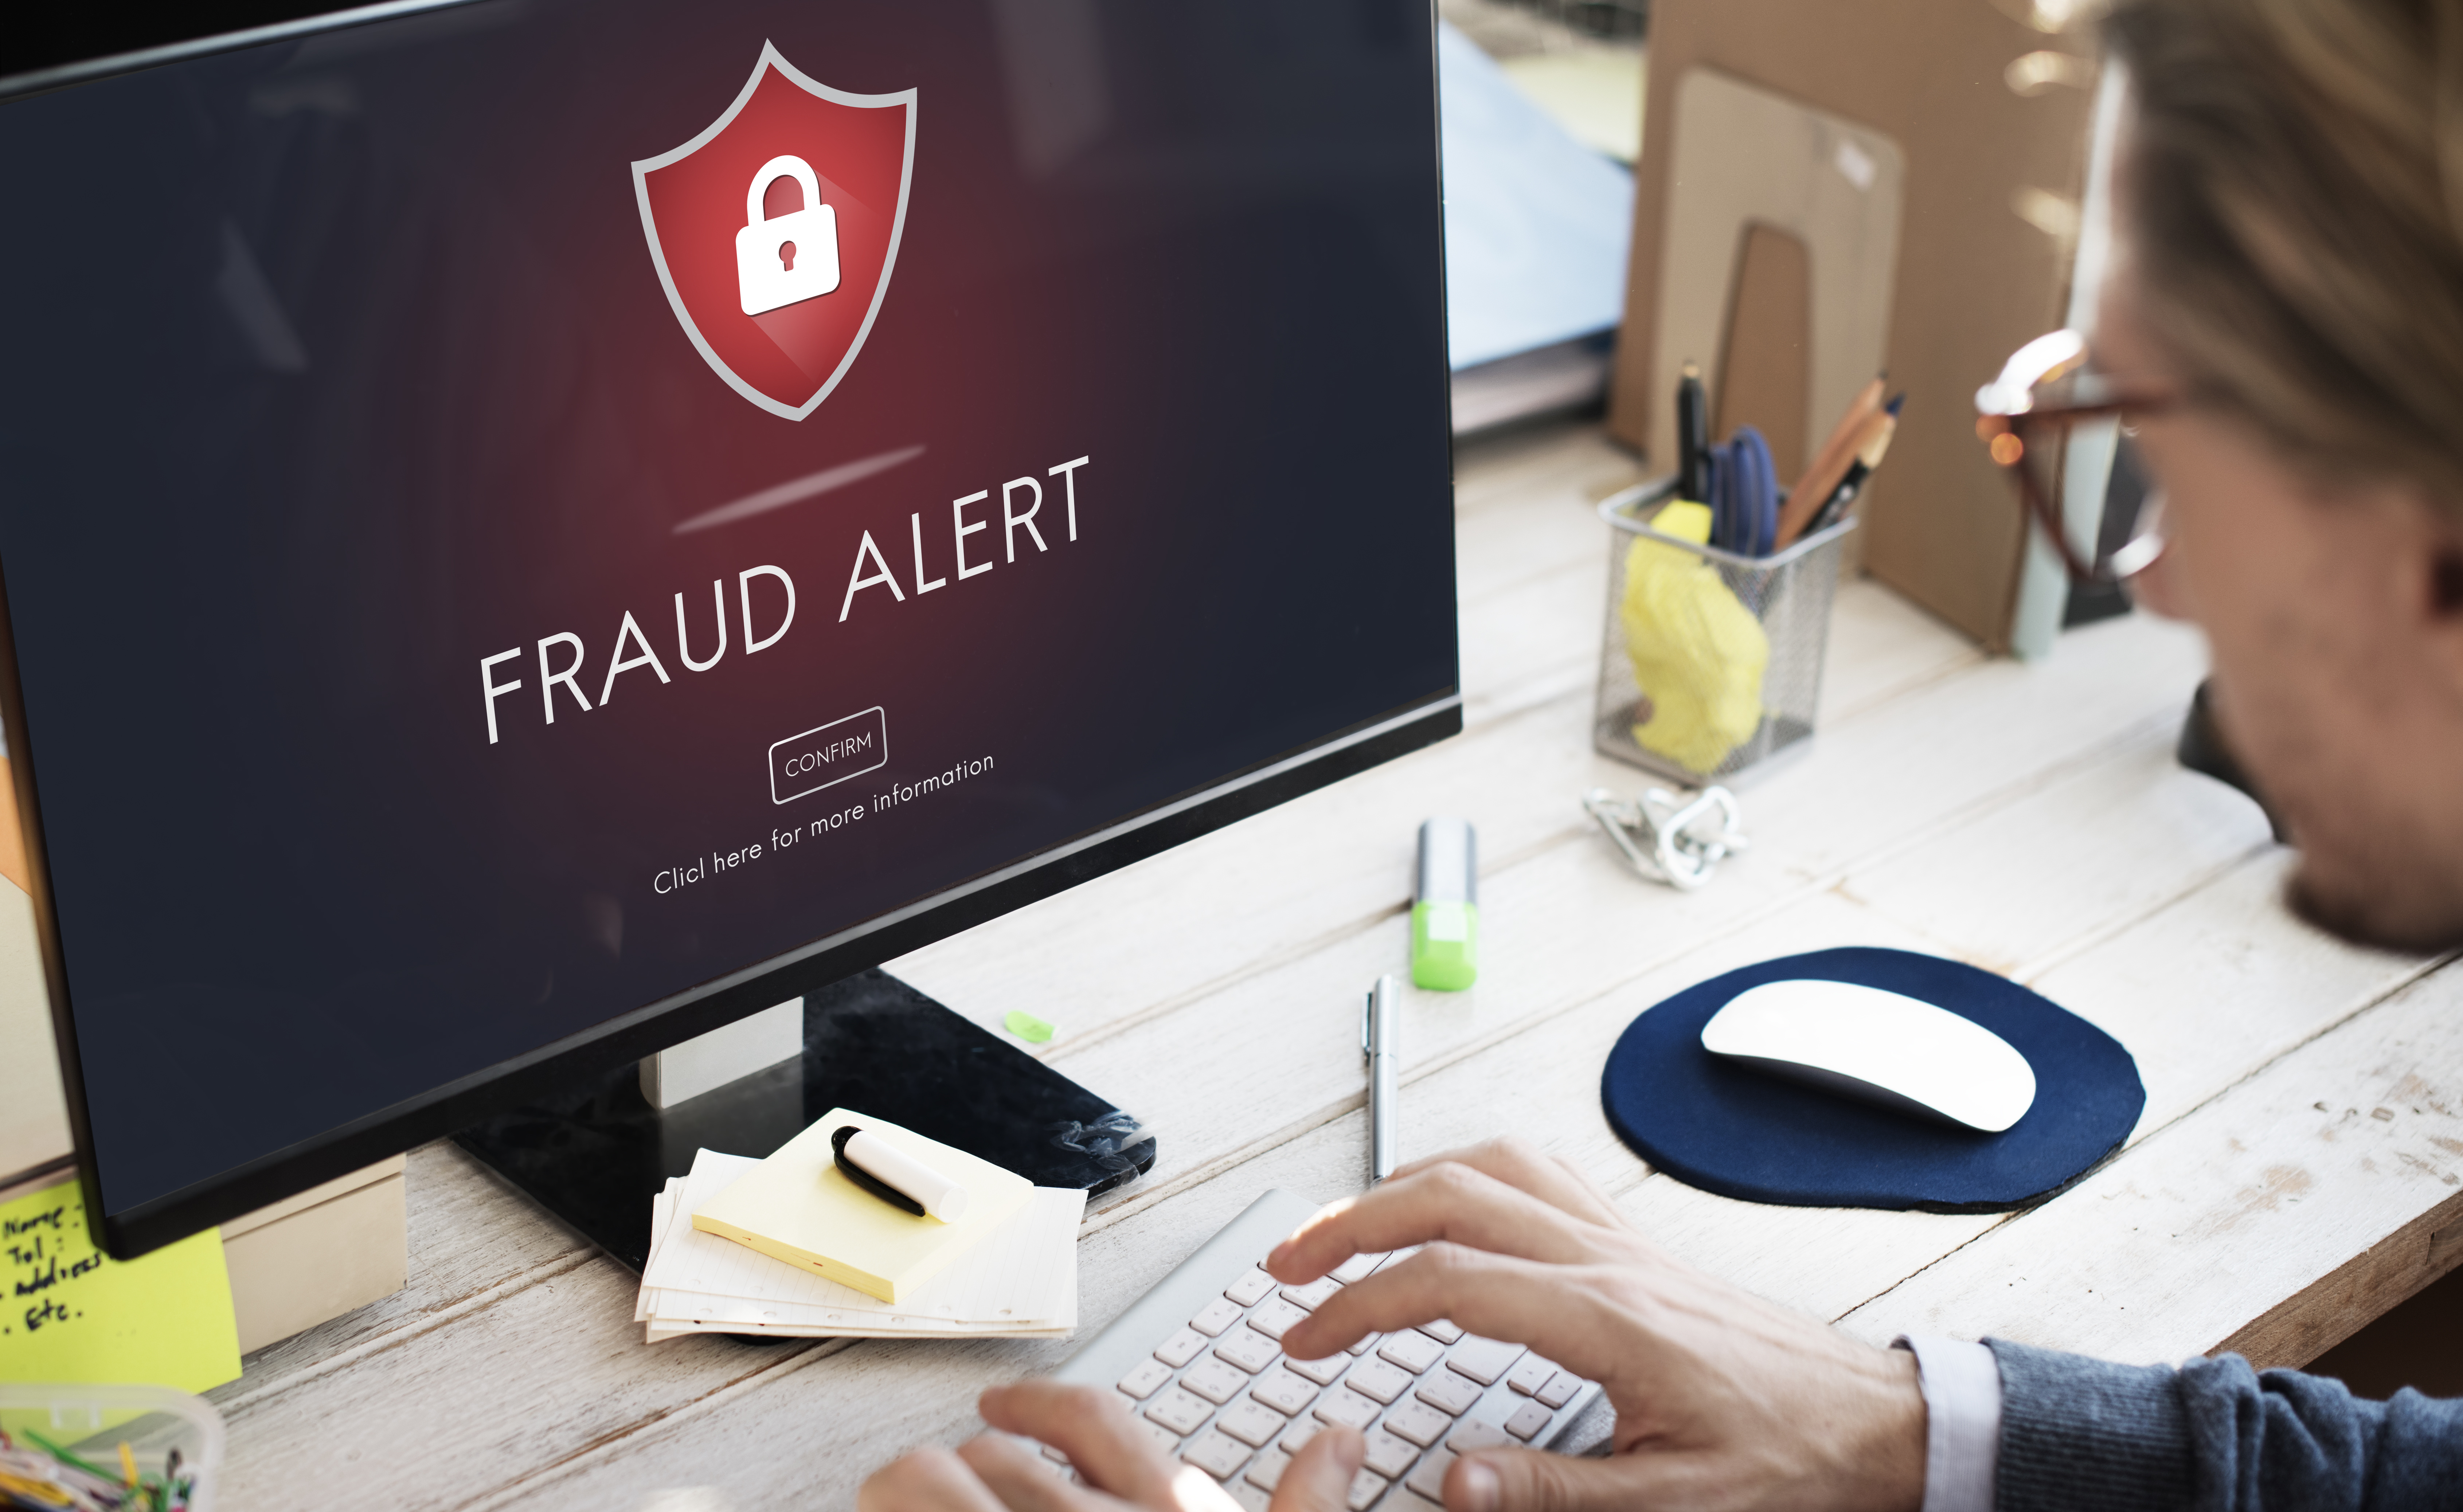 Getting more positive about fraud prevention